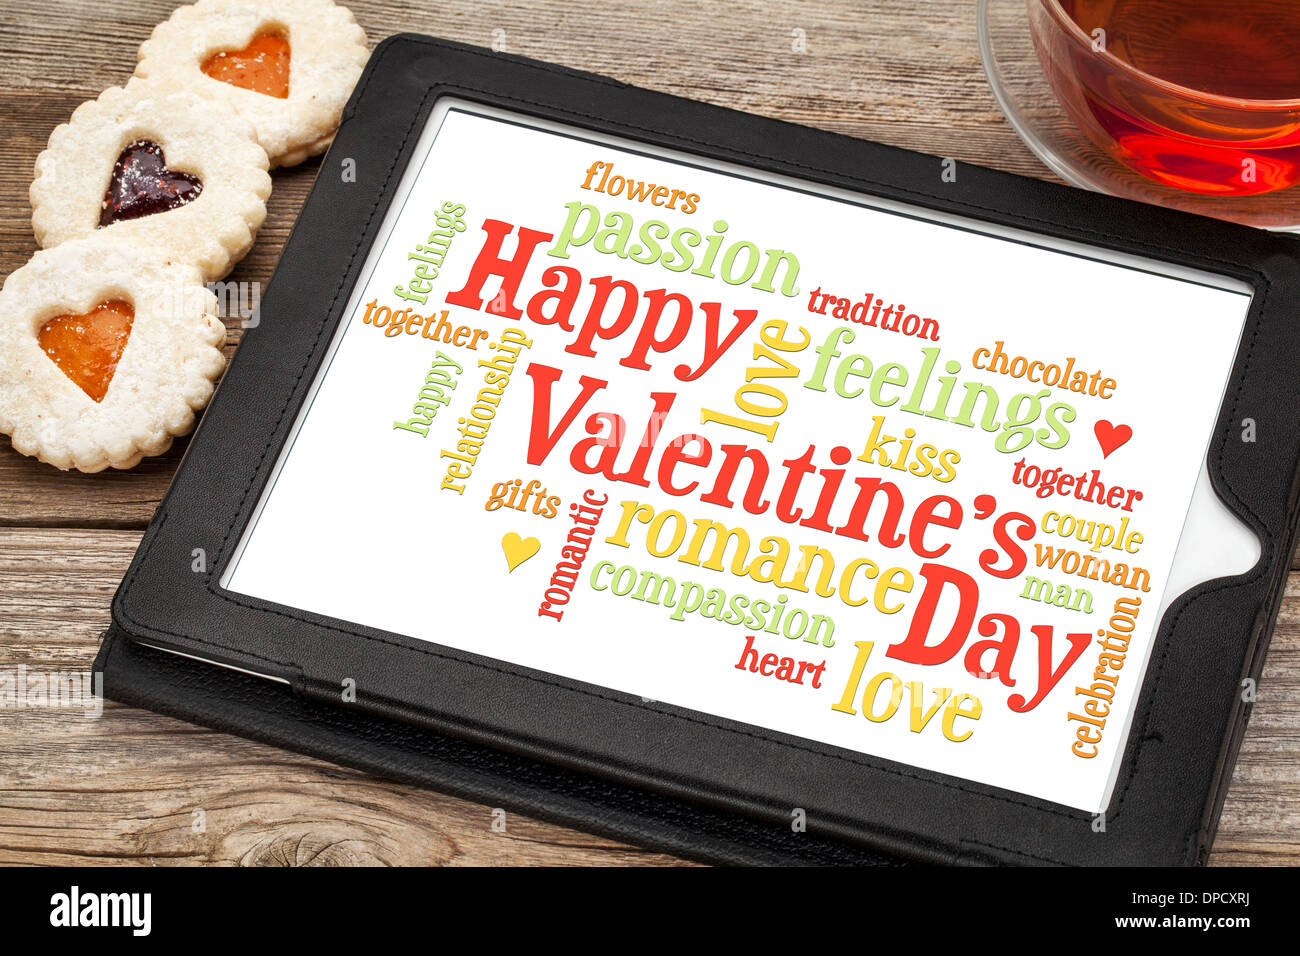 Happy Valentines Day word cloud on a digital tablet with heart cookies and a cup of tea Stock Photo